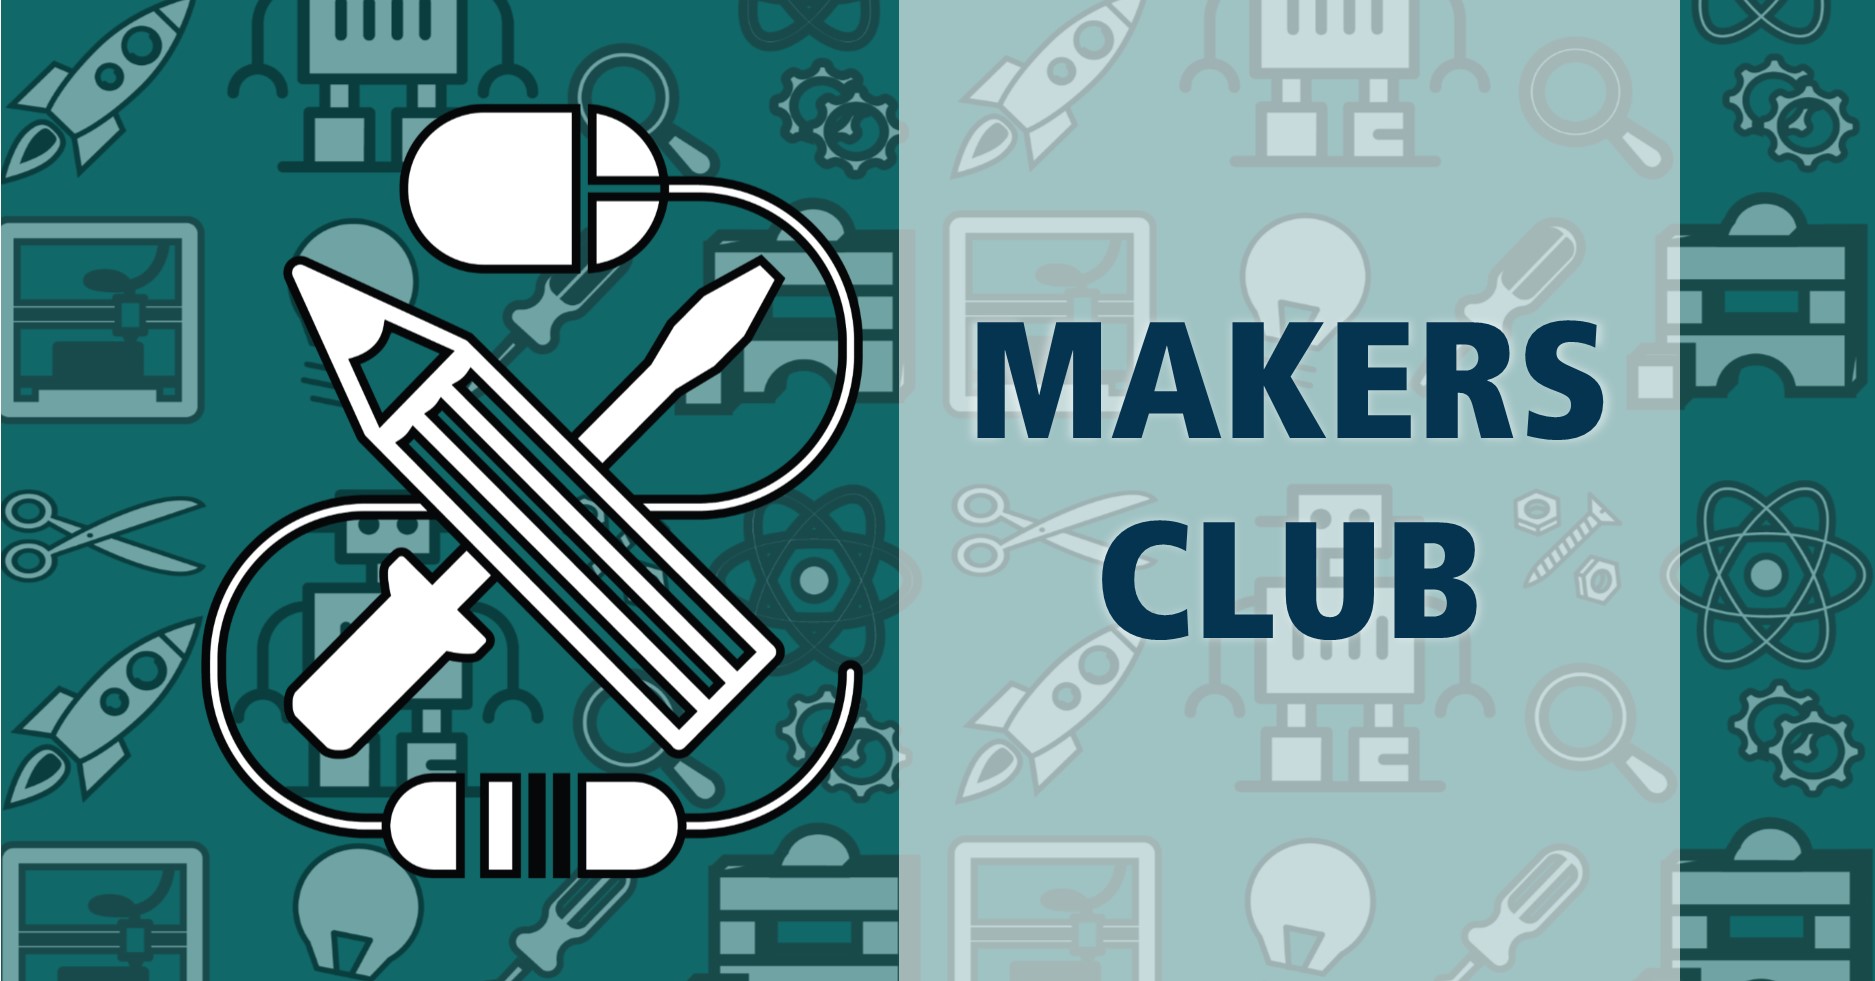 Illustration of a pencil, computer mouse, and screwdriver, with text that says Makers Club